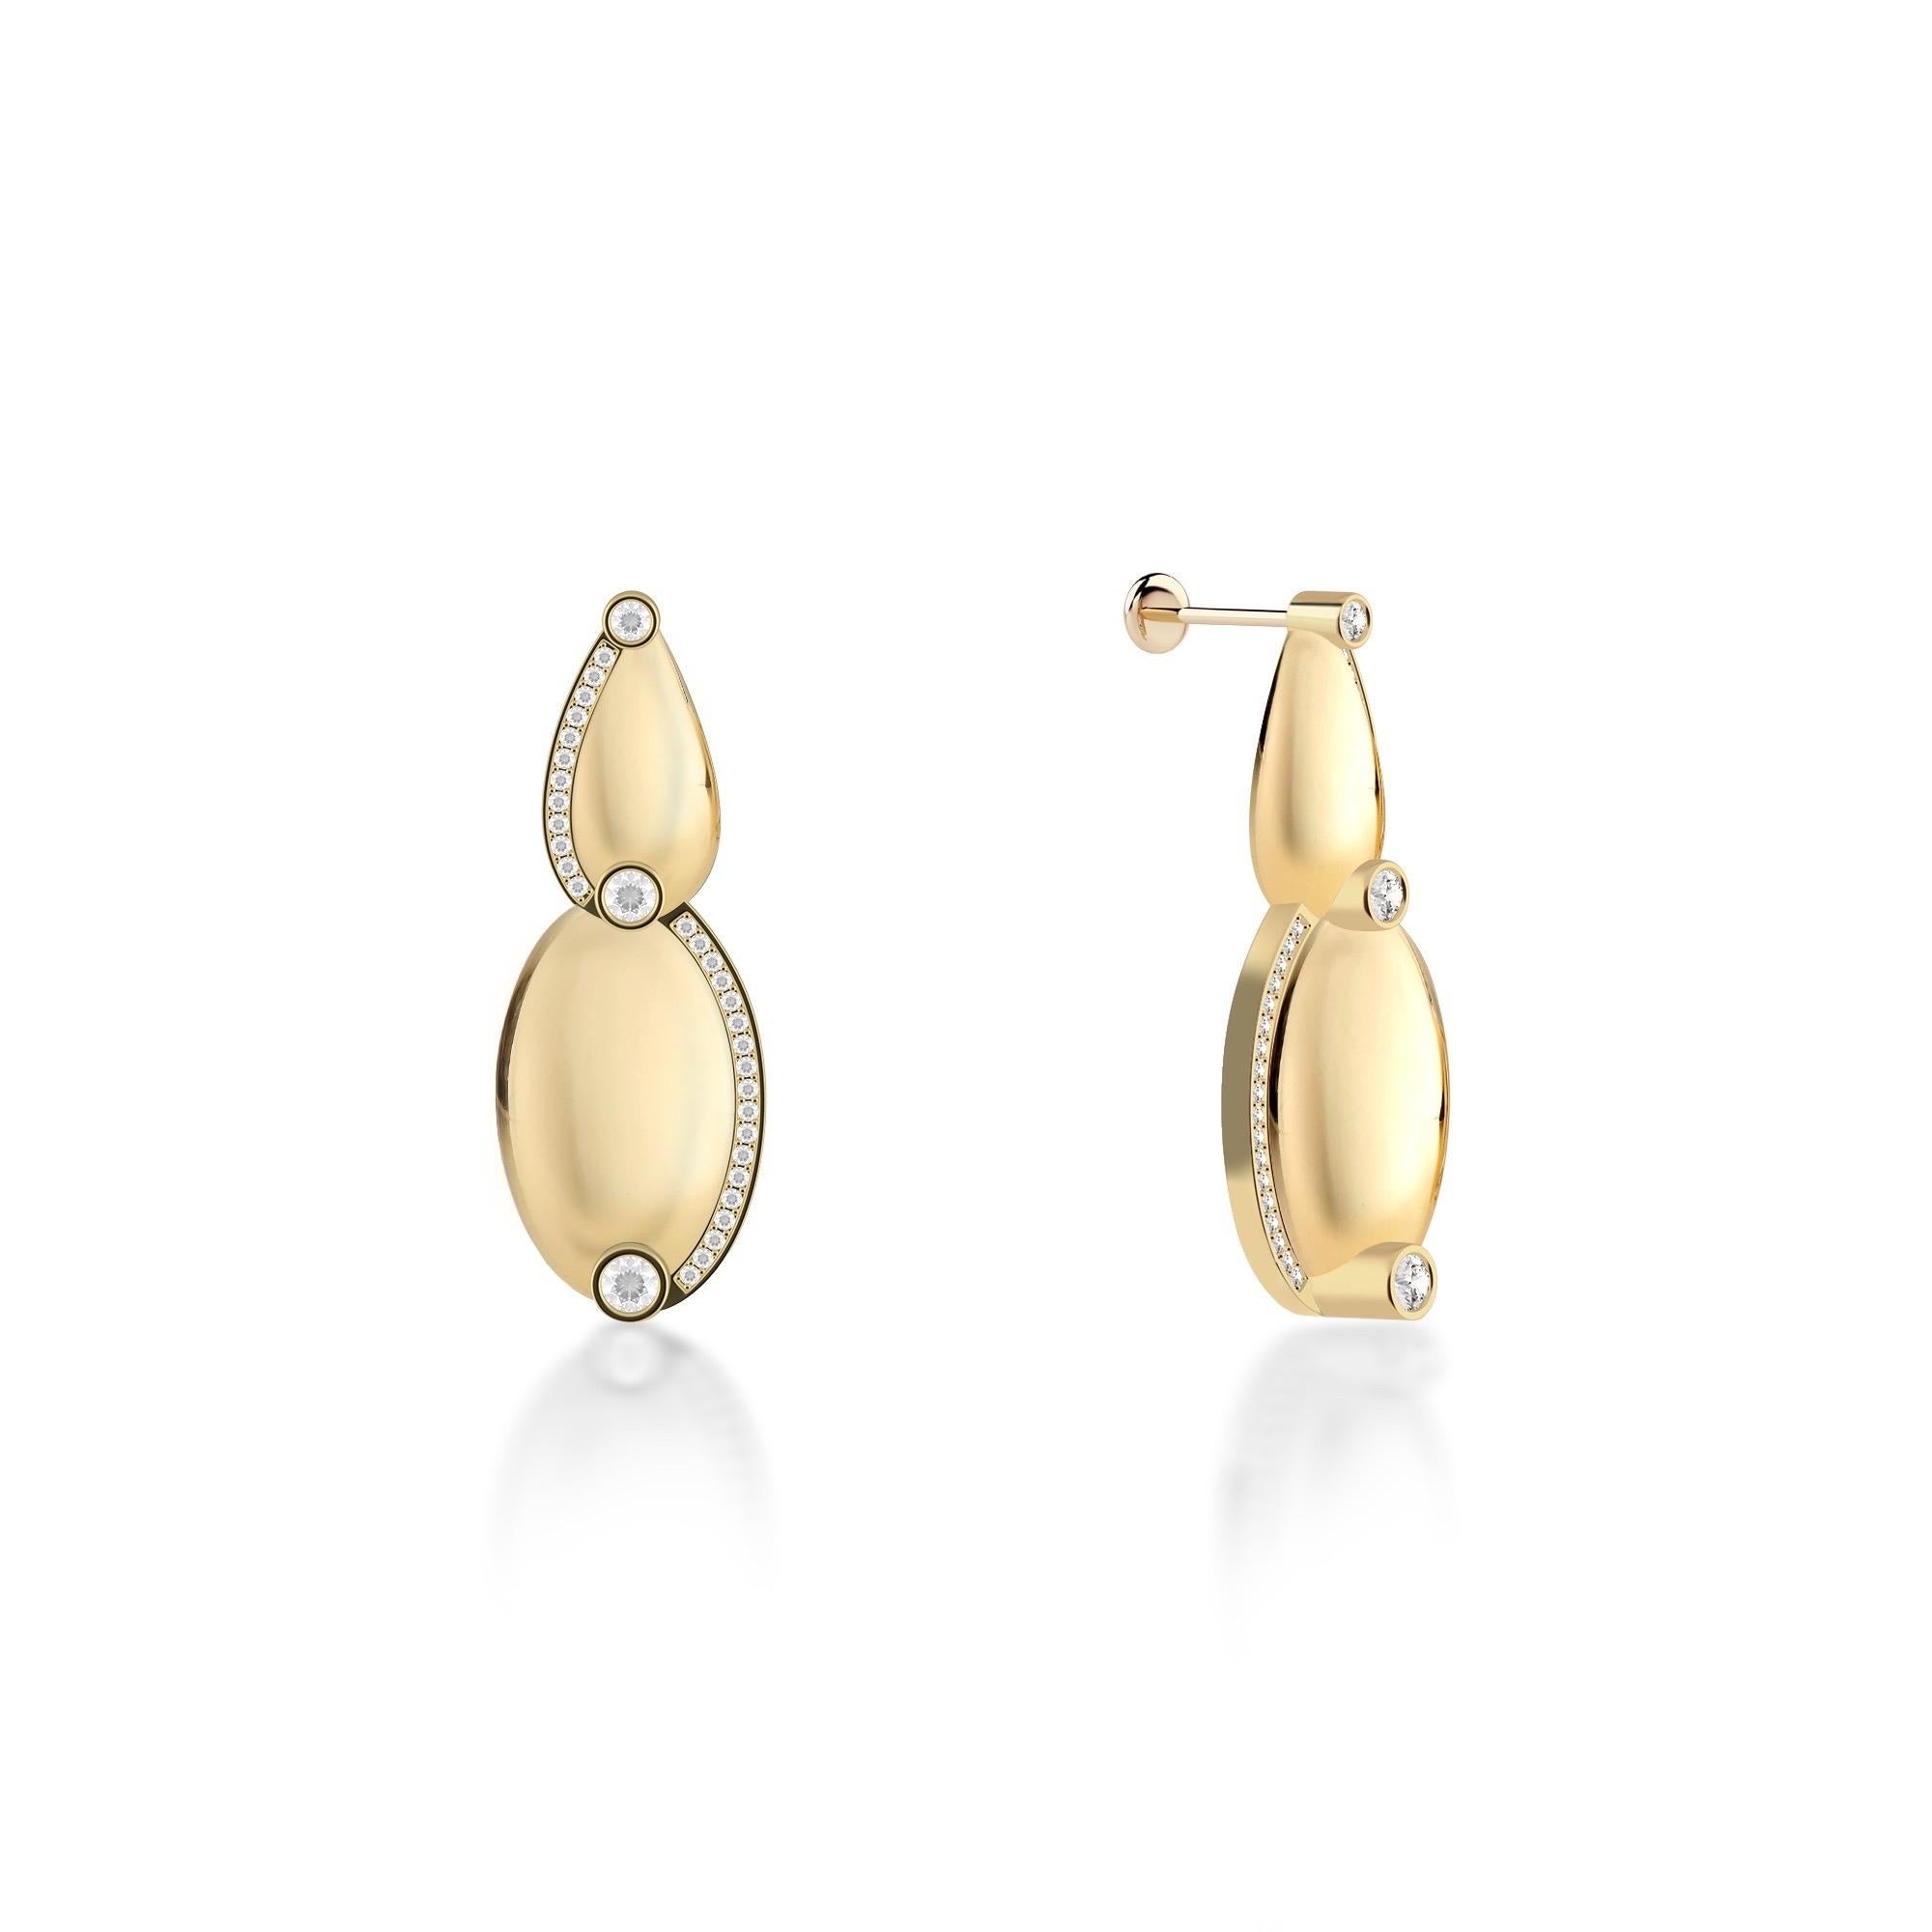 Round Cut Ruben Manuel “Summer” Earrings.  18K 2 Oval with VS White Diamonds 1.09 Ctw For Sale